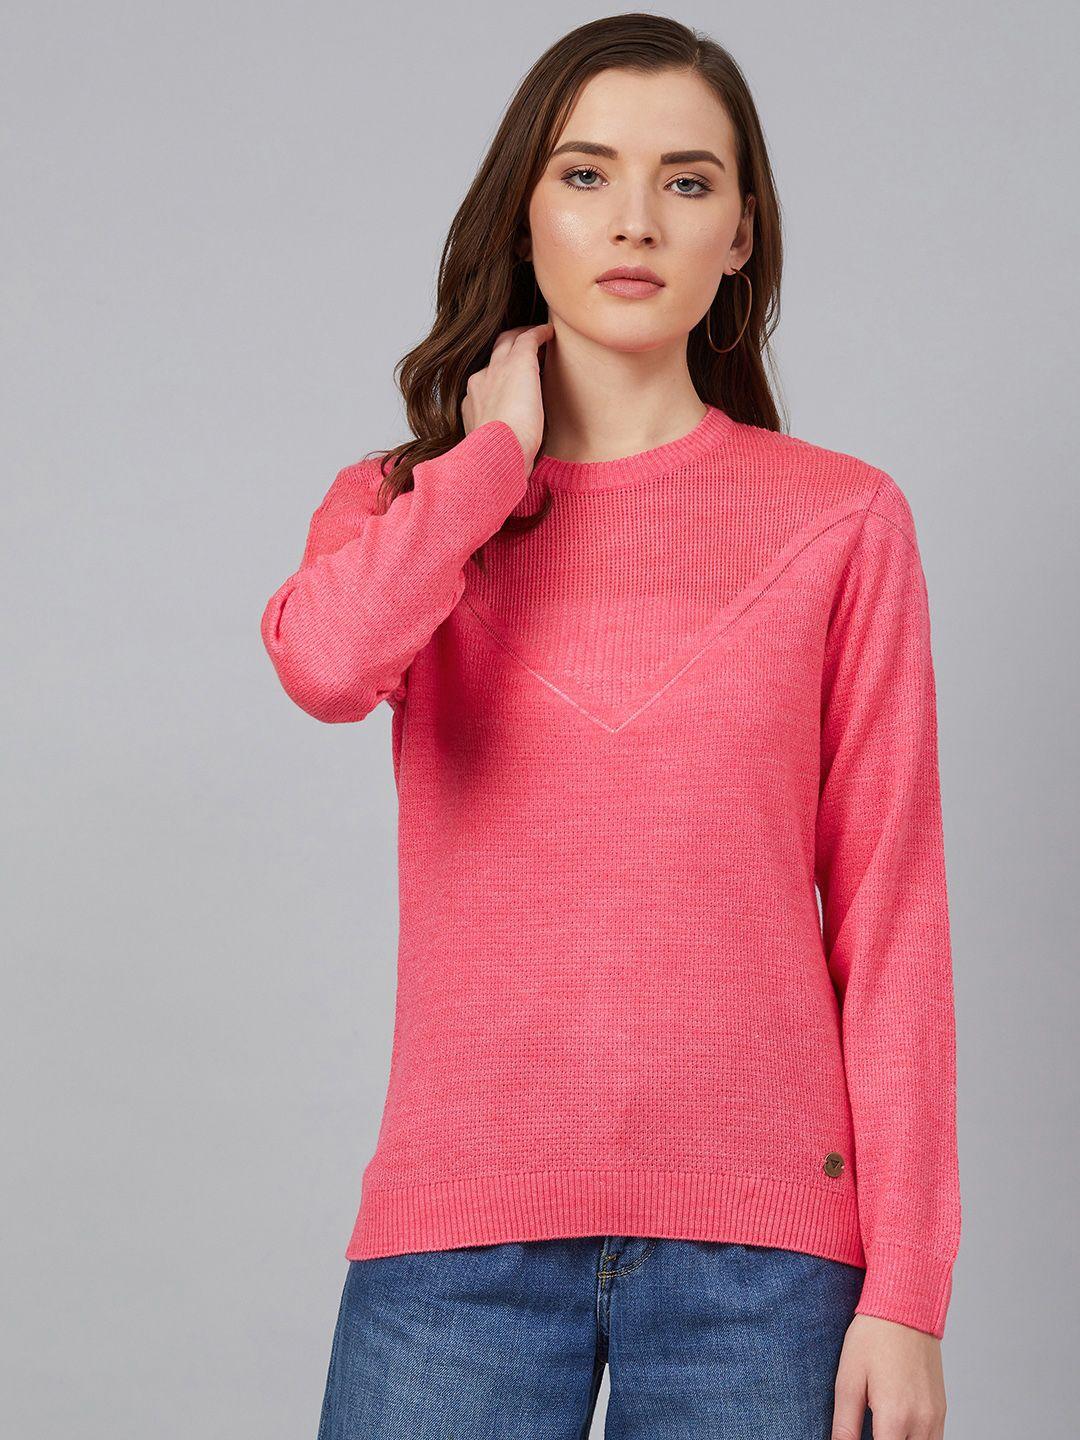 cayman-women-pink-solid-acrylic-pullover